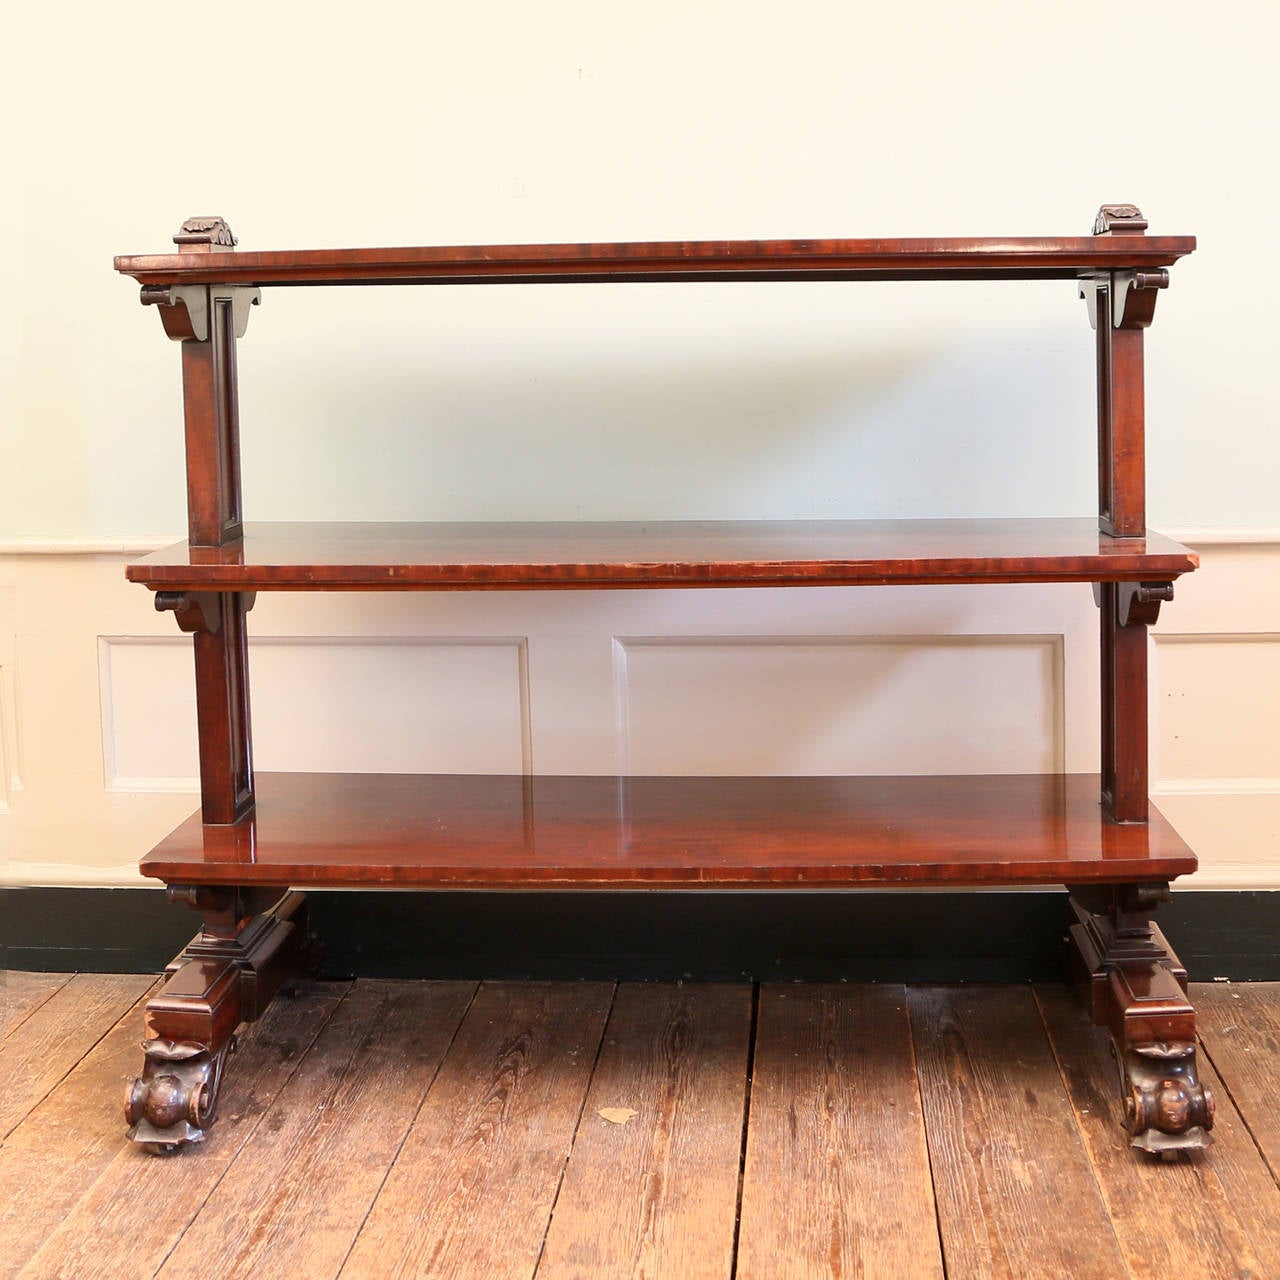 Three early Victorian mahogany buffets, the three tiers supported by scrolled brackets.

Available to view at Brunswick House, London.

Height 124cm, width 152cm, depth 52cm.